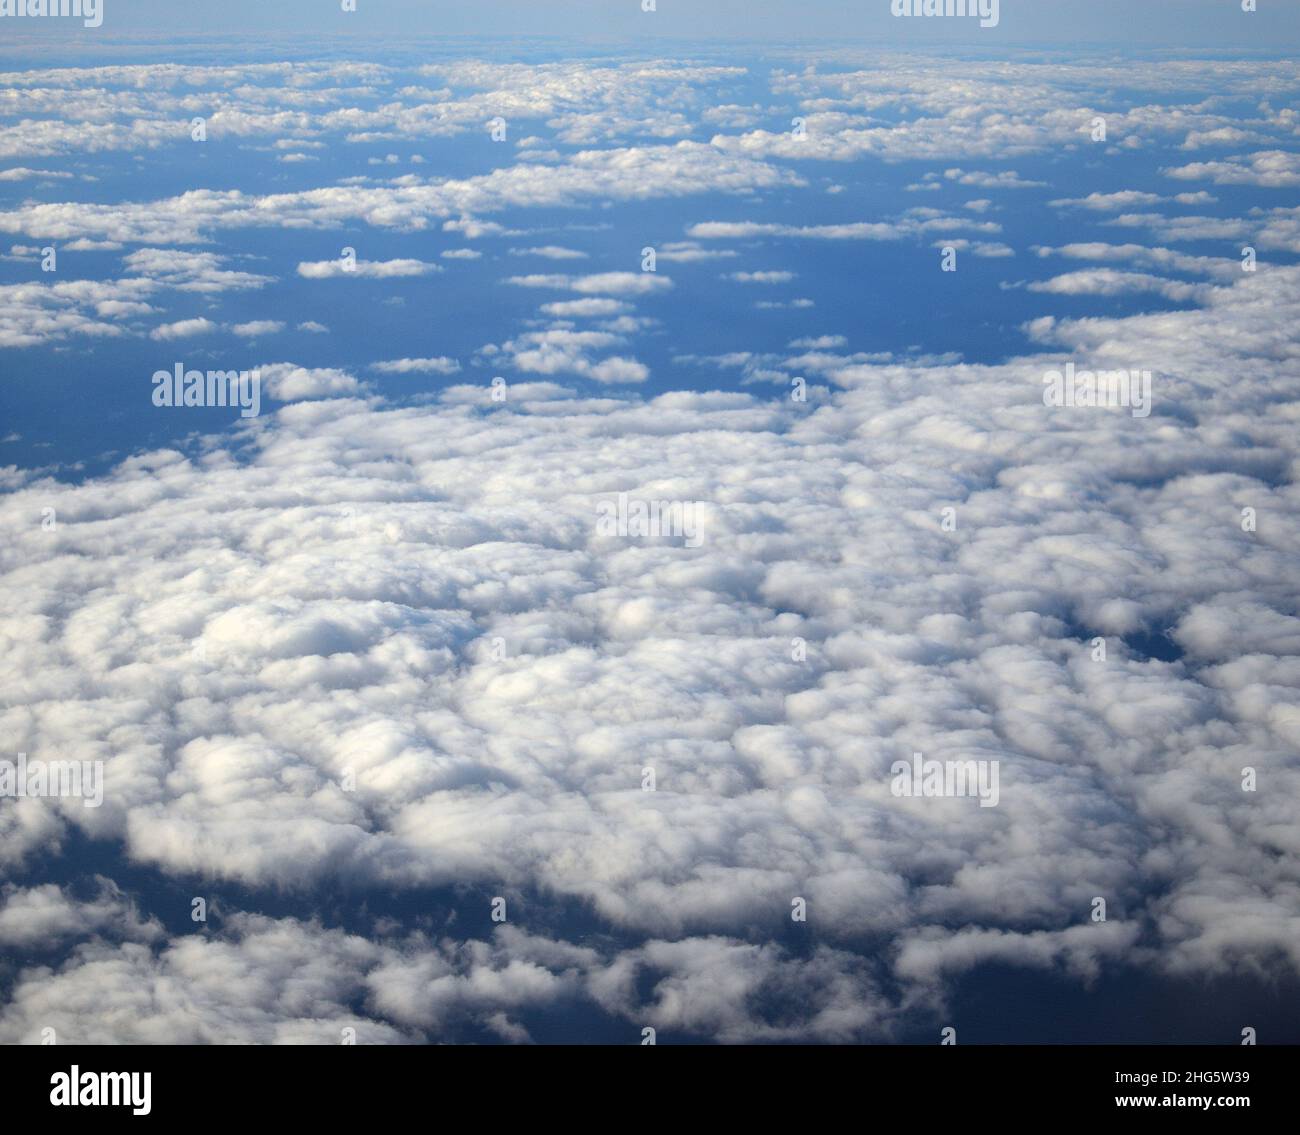 Layer of low clouds over the sea seen from arr Stock Photo